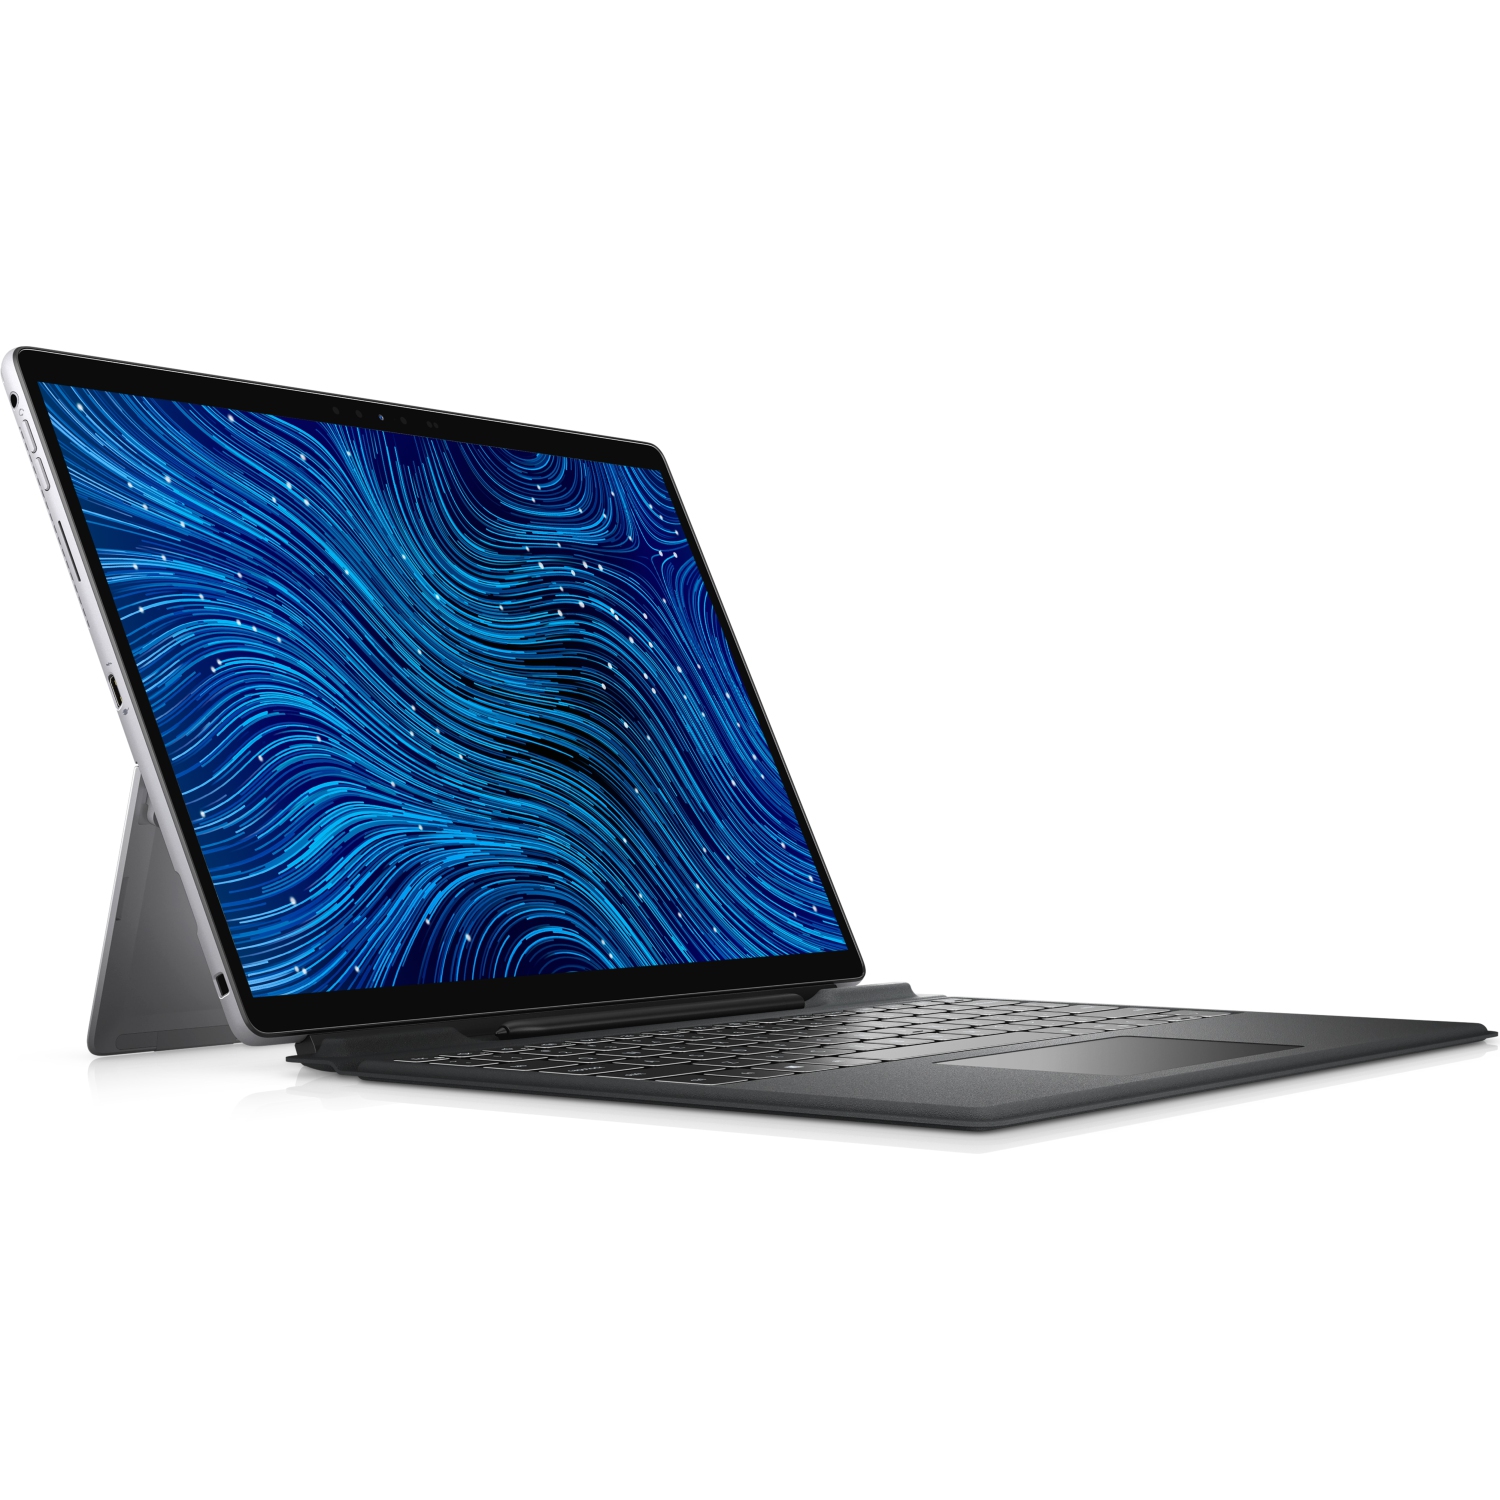 Refurbished (Excellent) – Dell Latitude 7000 7320 Detachable 2-in-1 (2021) | 13" FHD+ Touch | Core i5 - 128GB SSD - 8GB RAM | 4 Cores @ 4.2 GHz - 11th Gen CPU